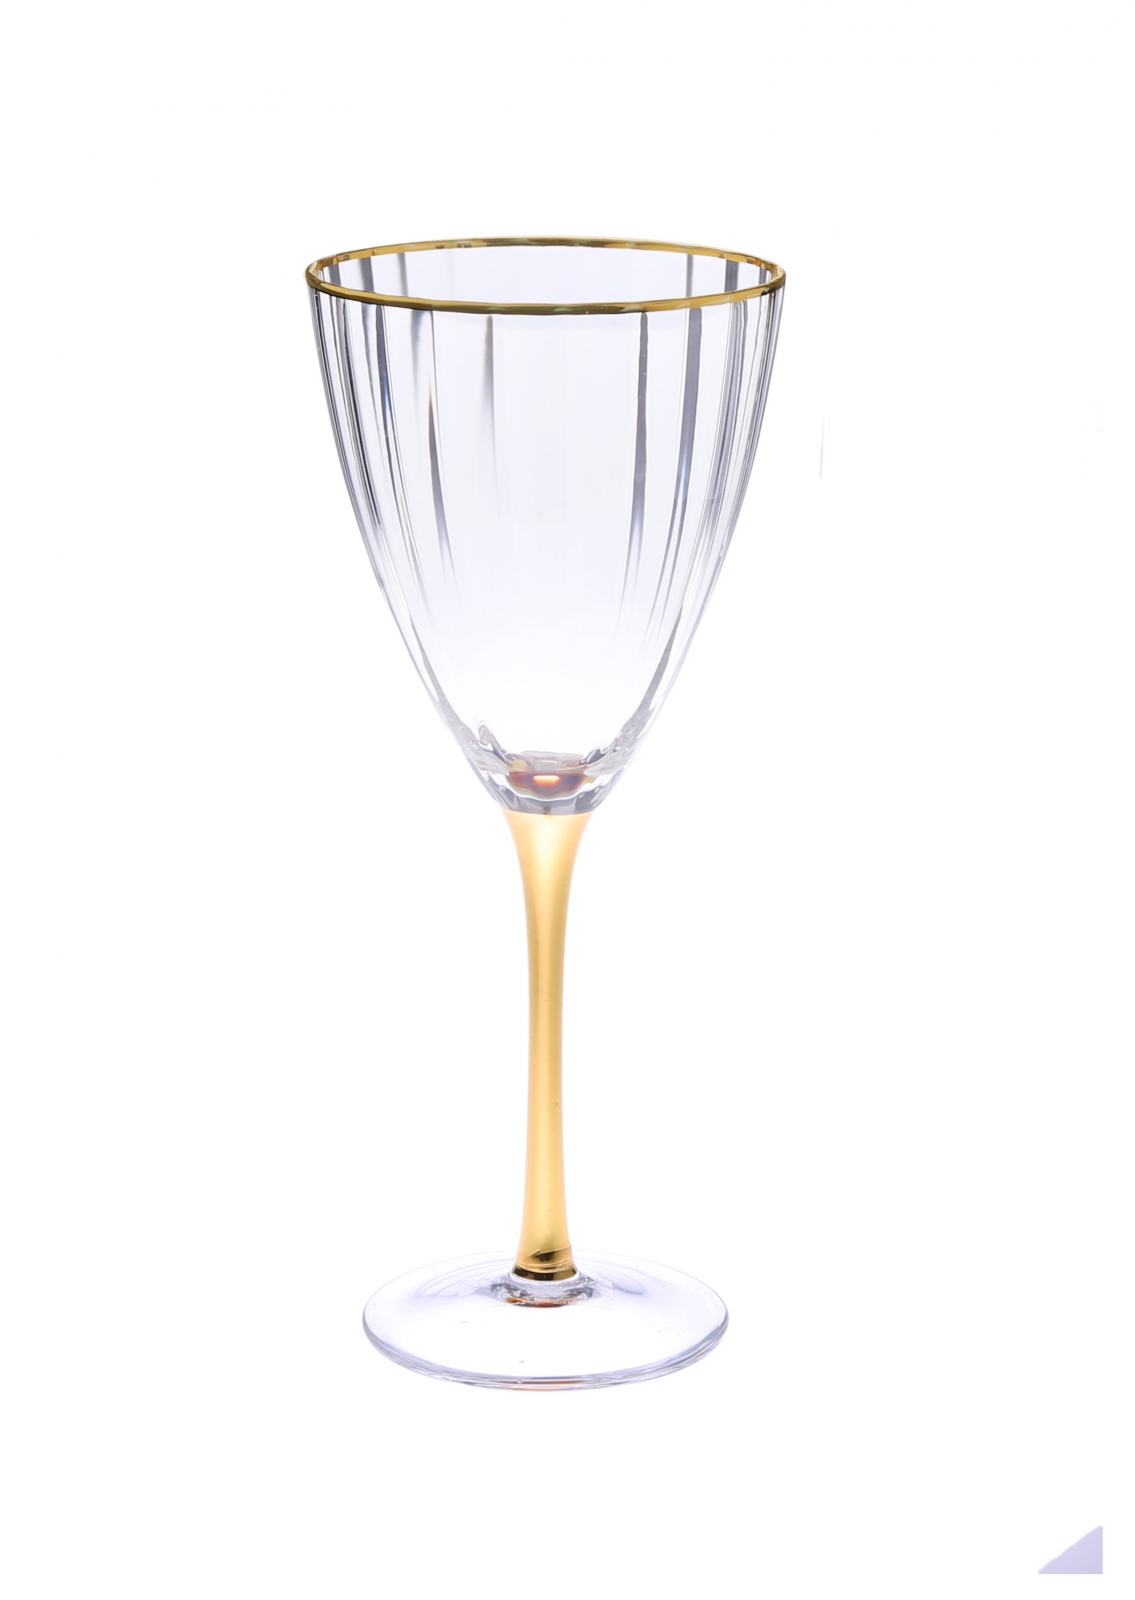 Set of 6 Textured Wine Glasses with Gold Stem and Rim